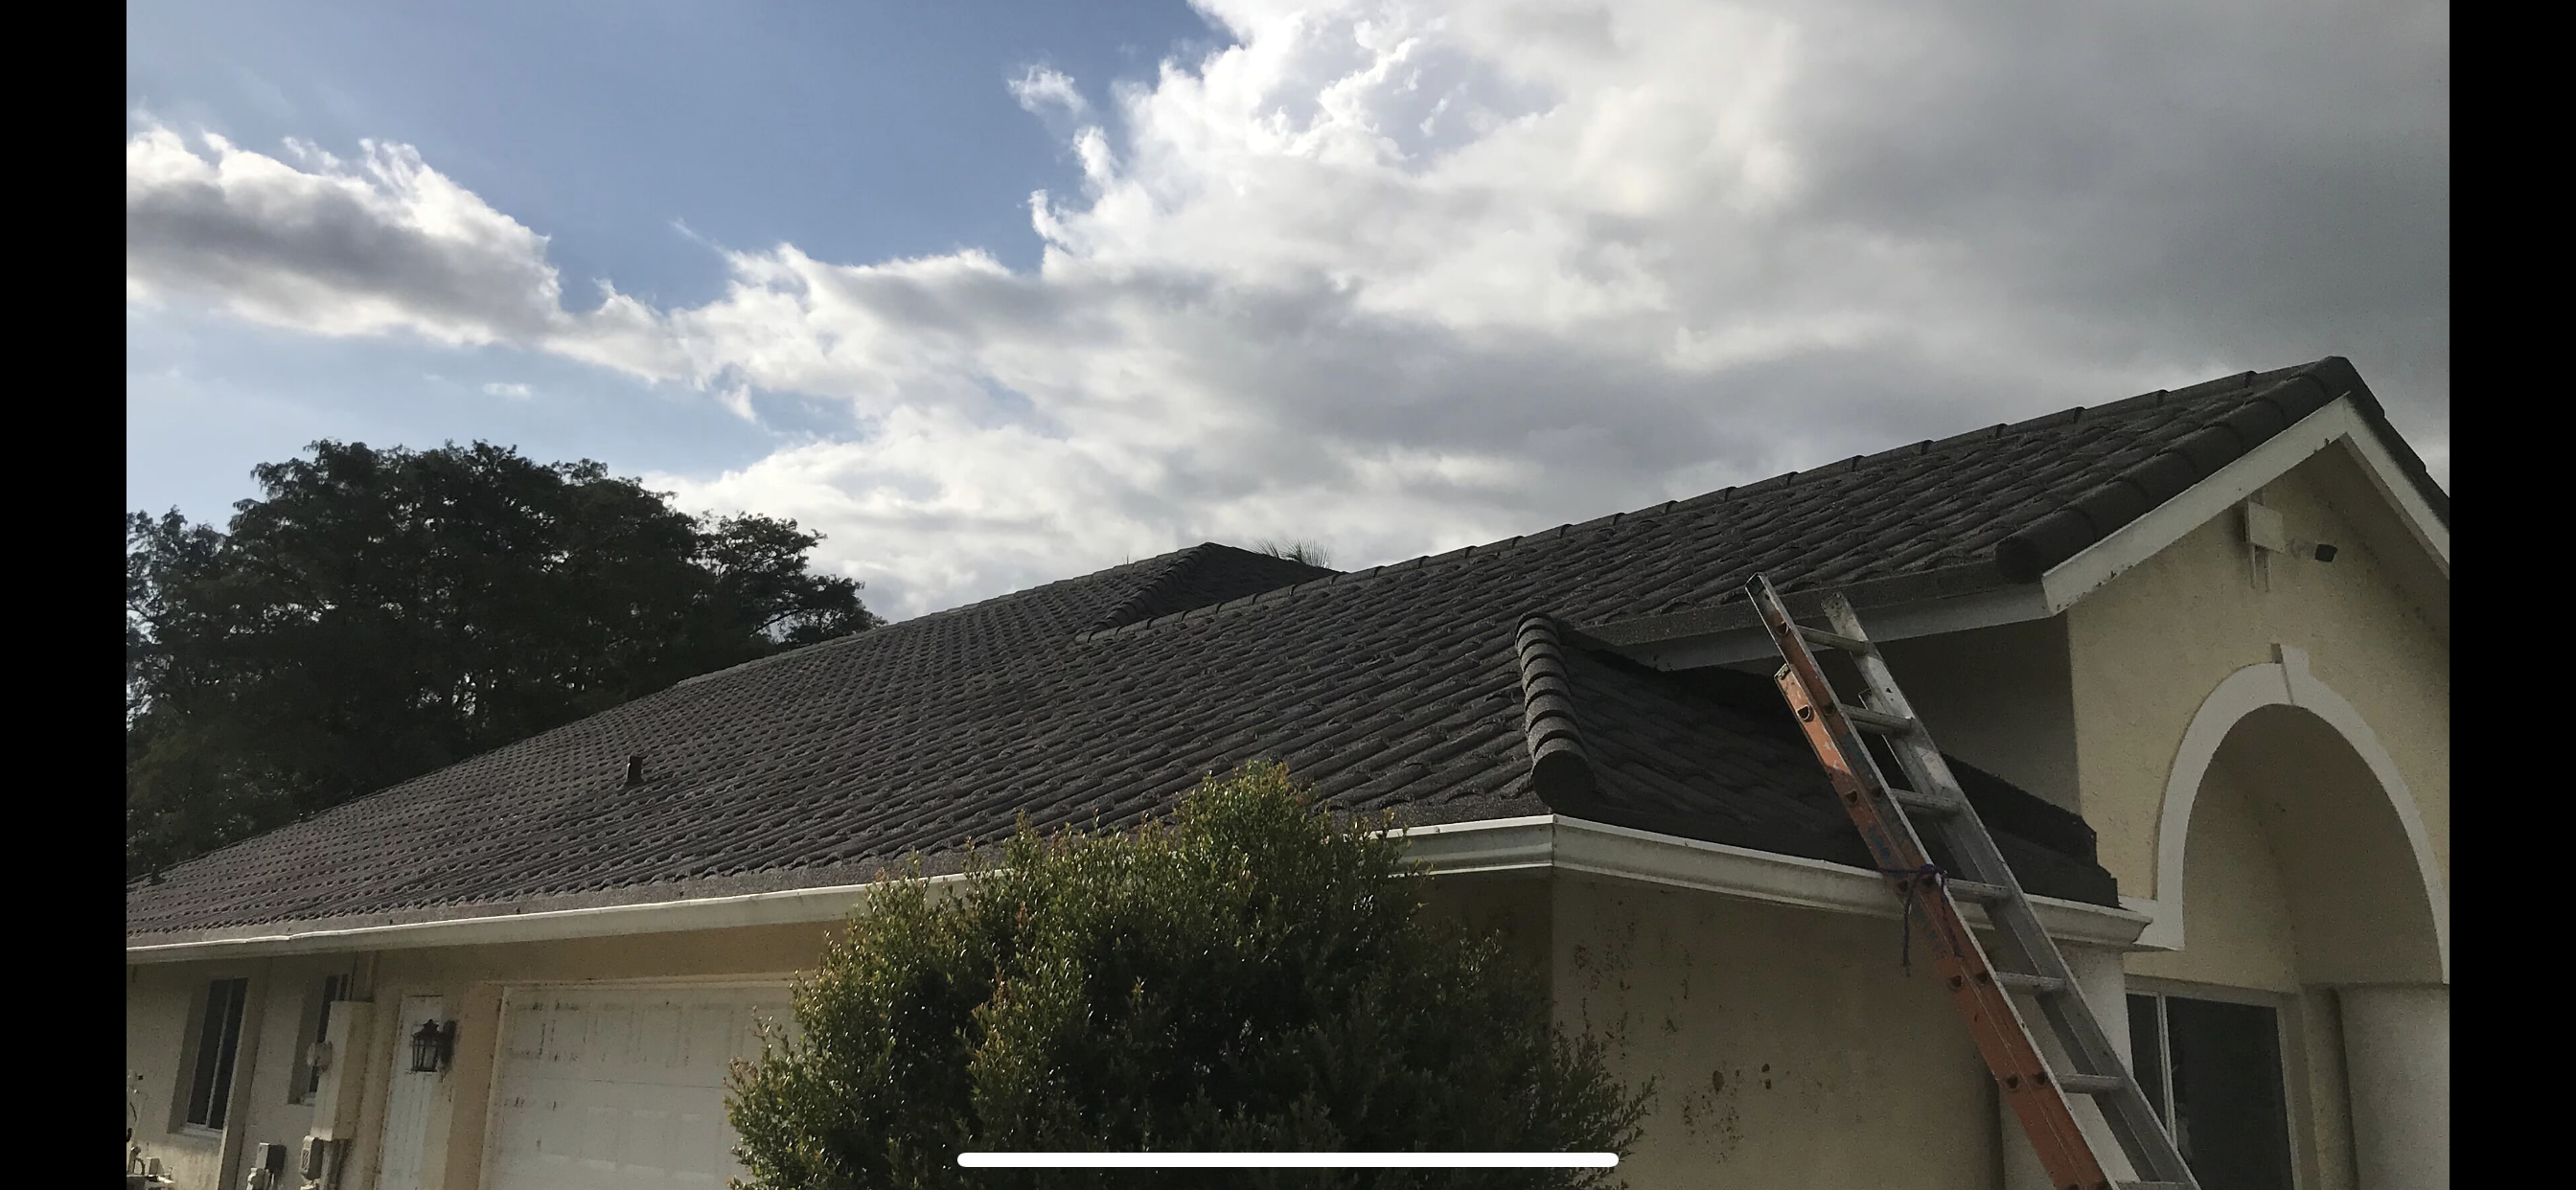 Roofing Experts, Inc. Tile Project